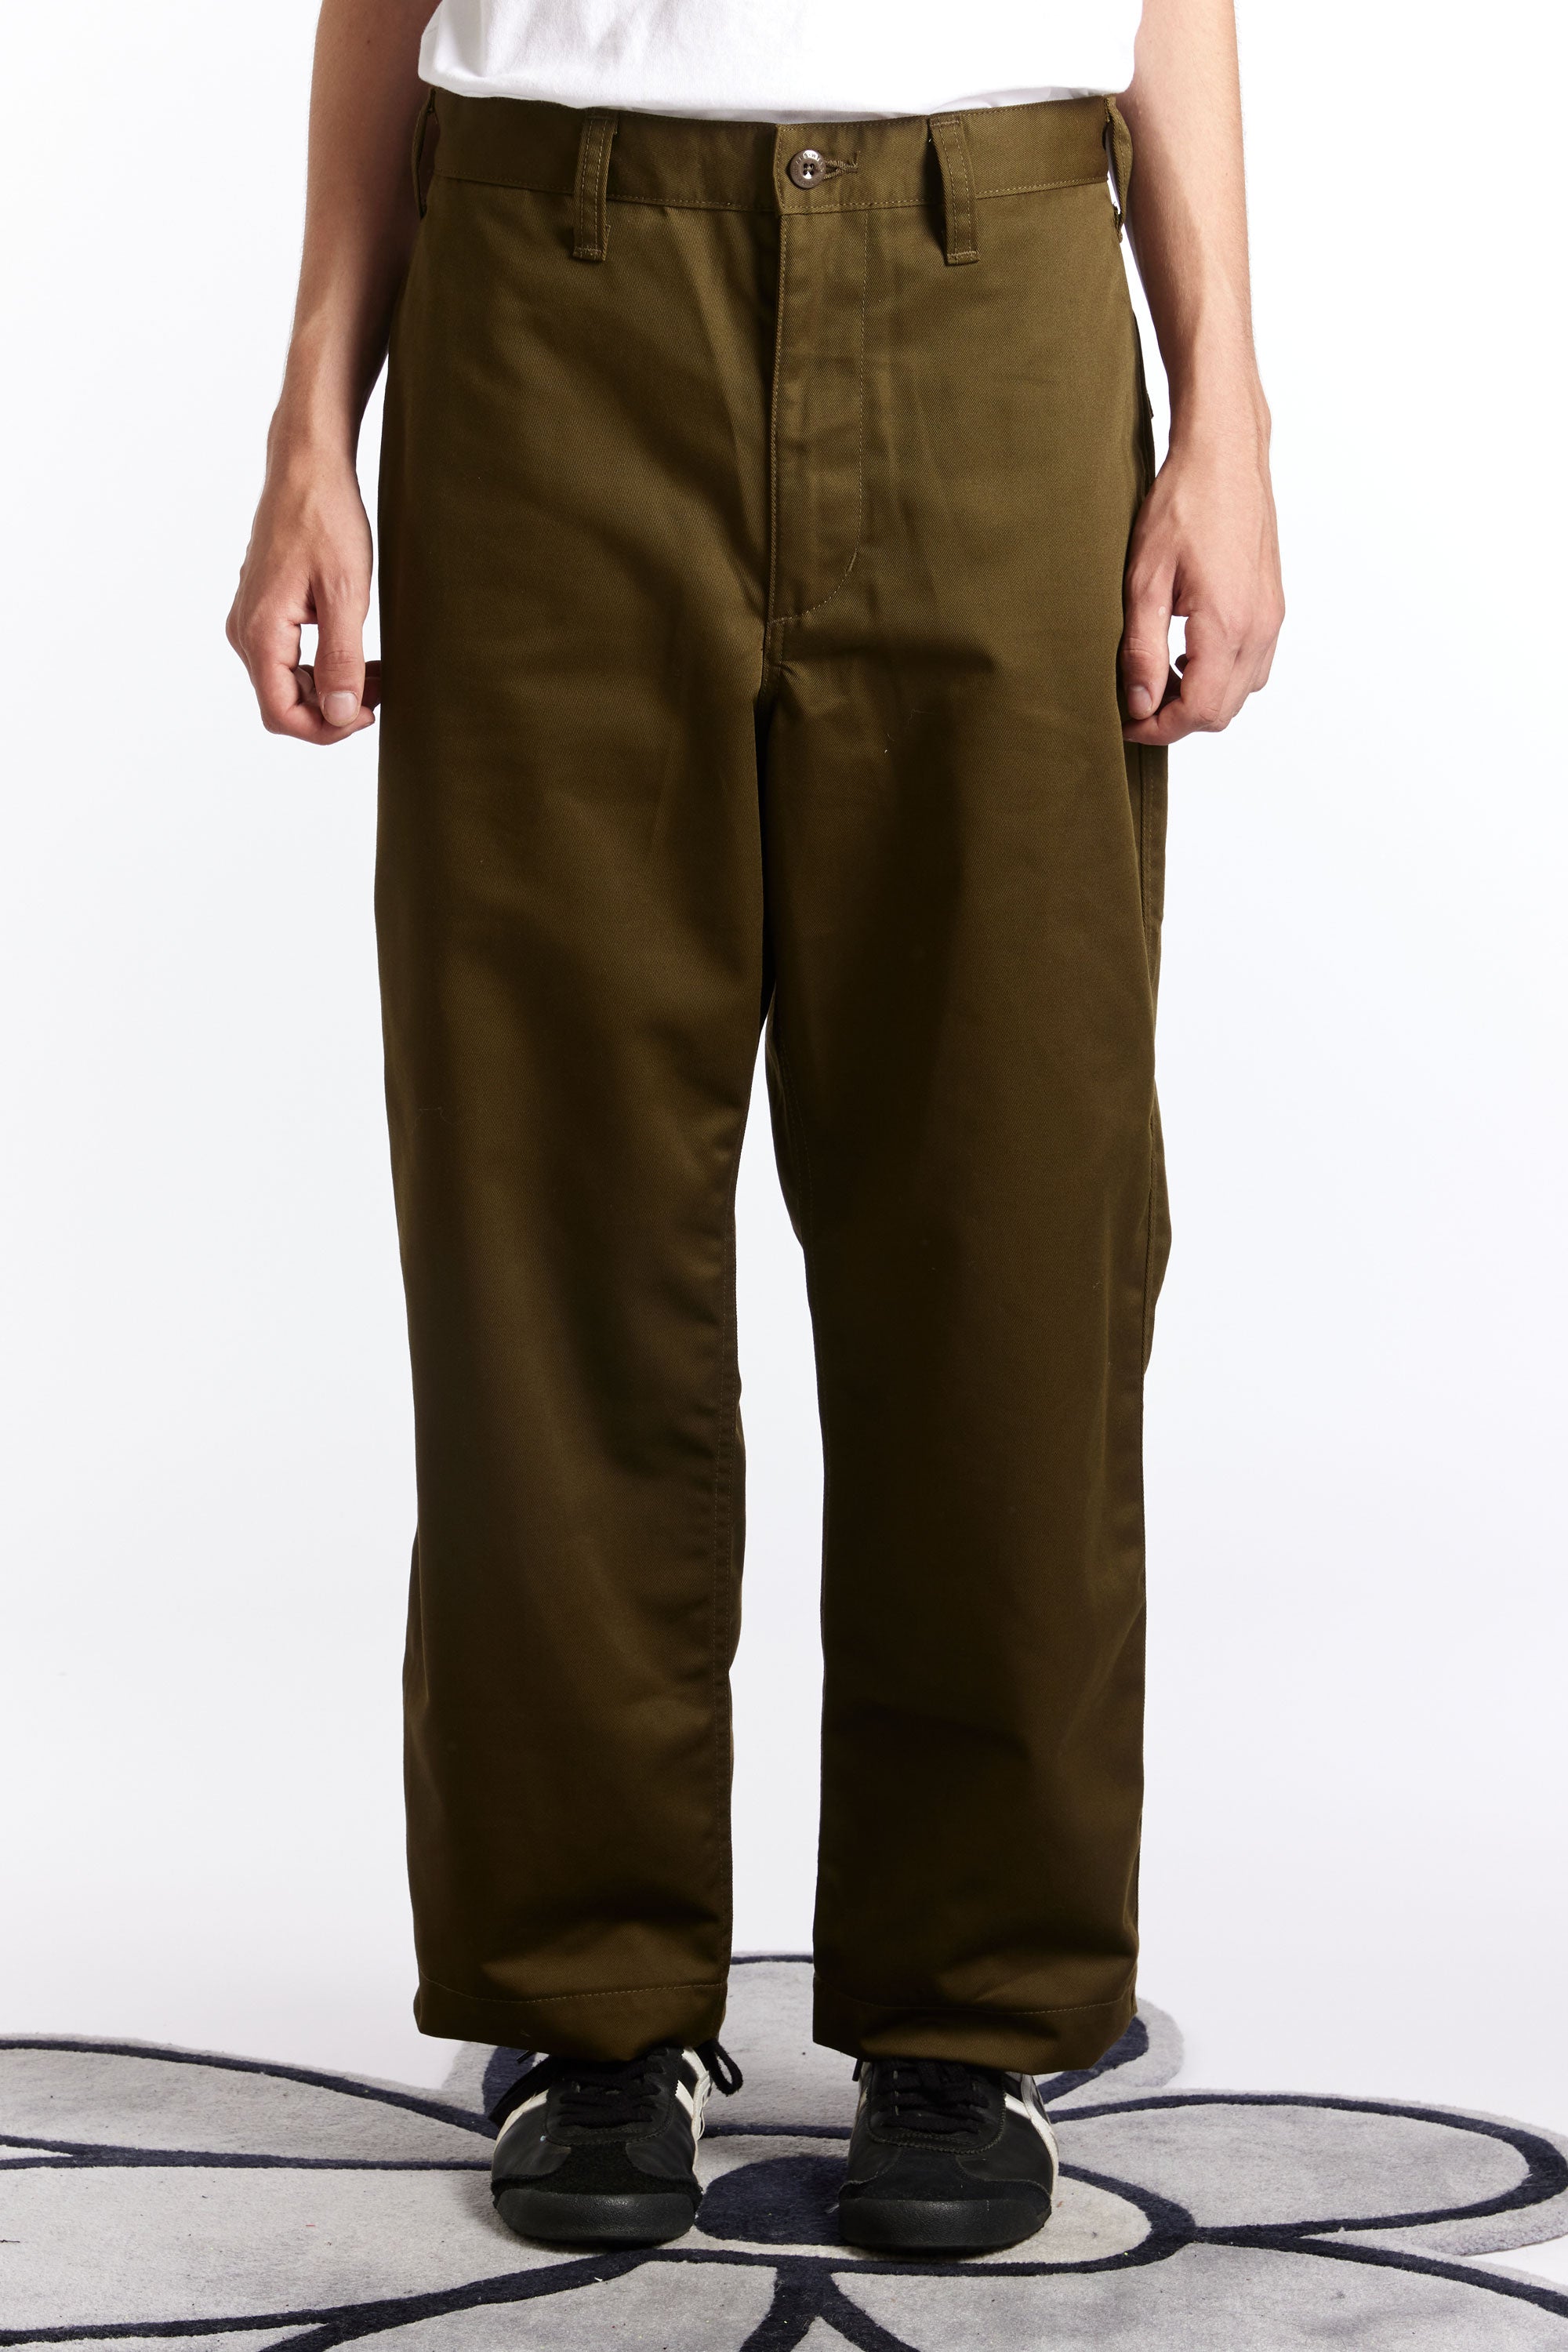 WTAPS - MILT9601 TROUSERS COTTON POLY TWILL – P.A.M. (Perks And Mini)